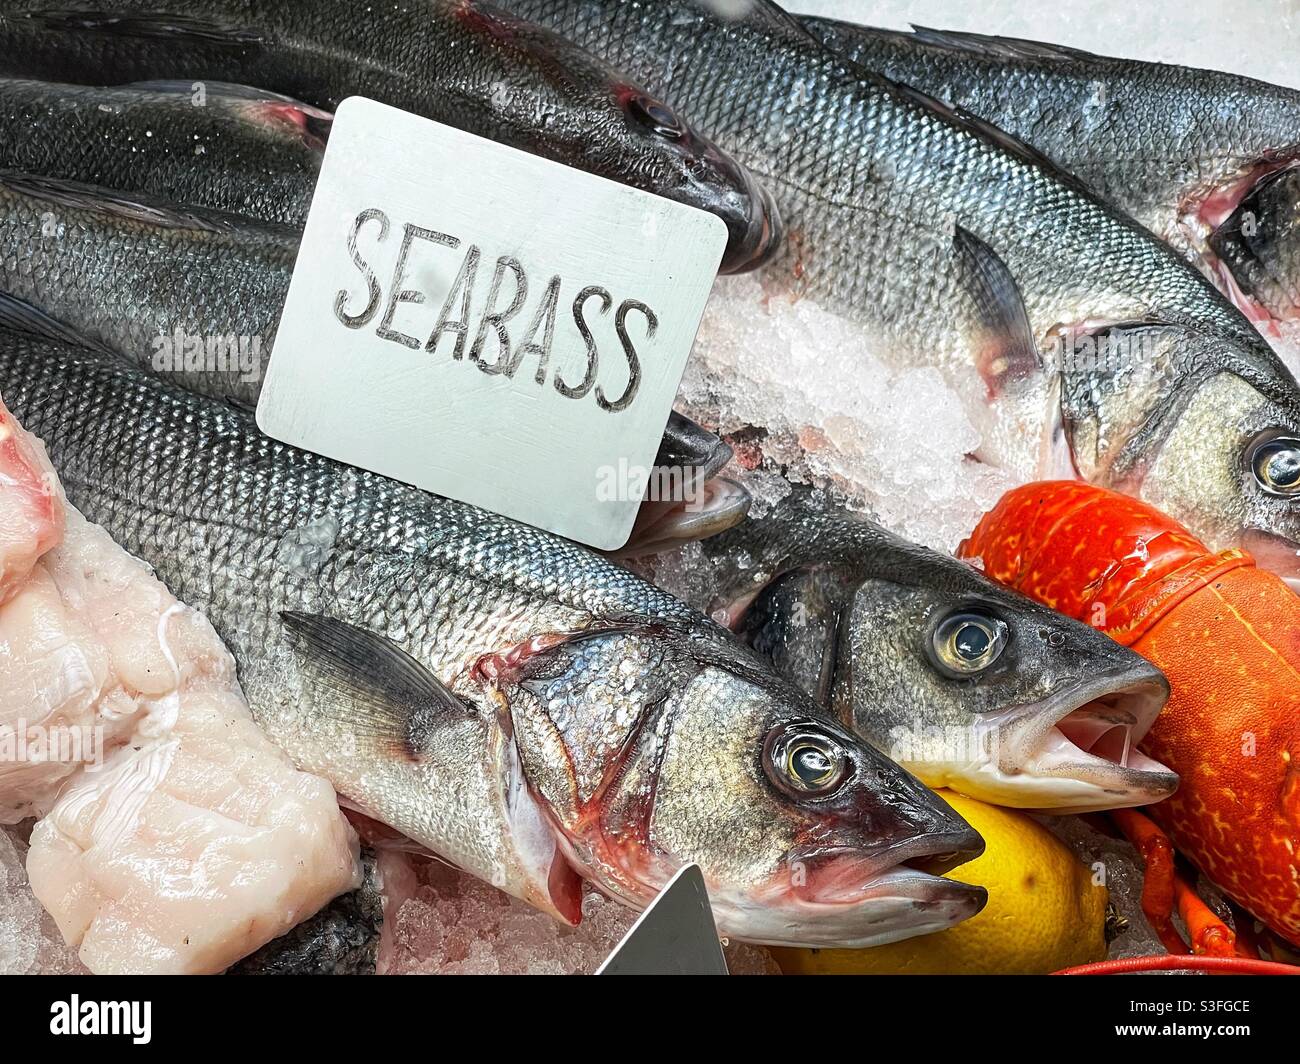 Sea bass on ice in a restaurant display counter Stock Photo